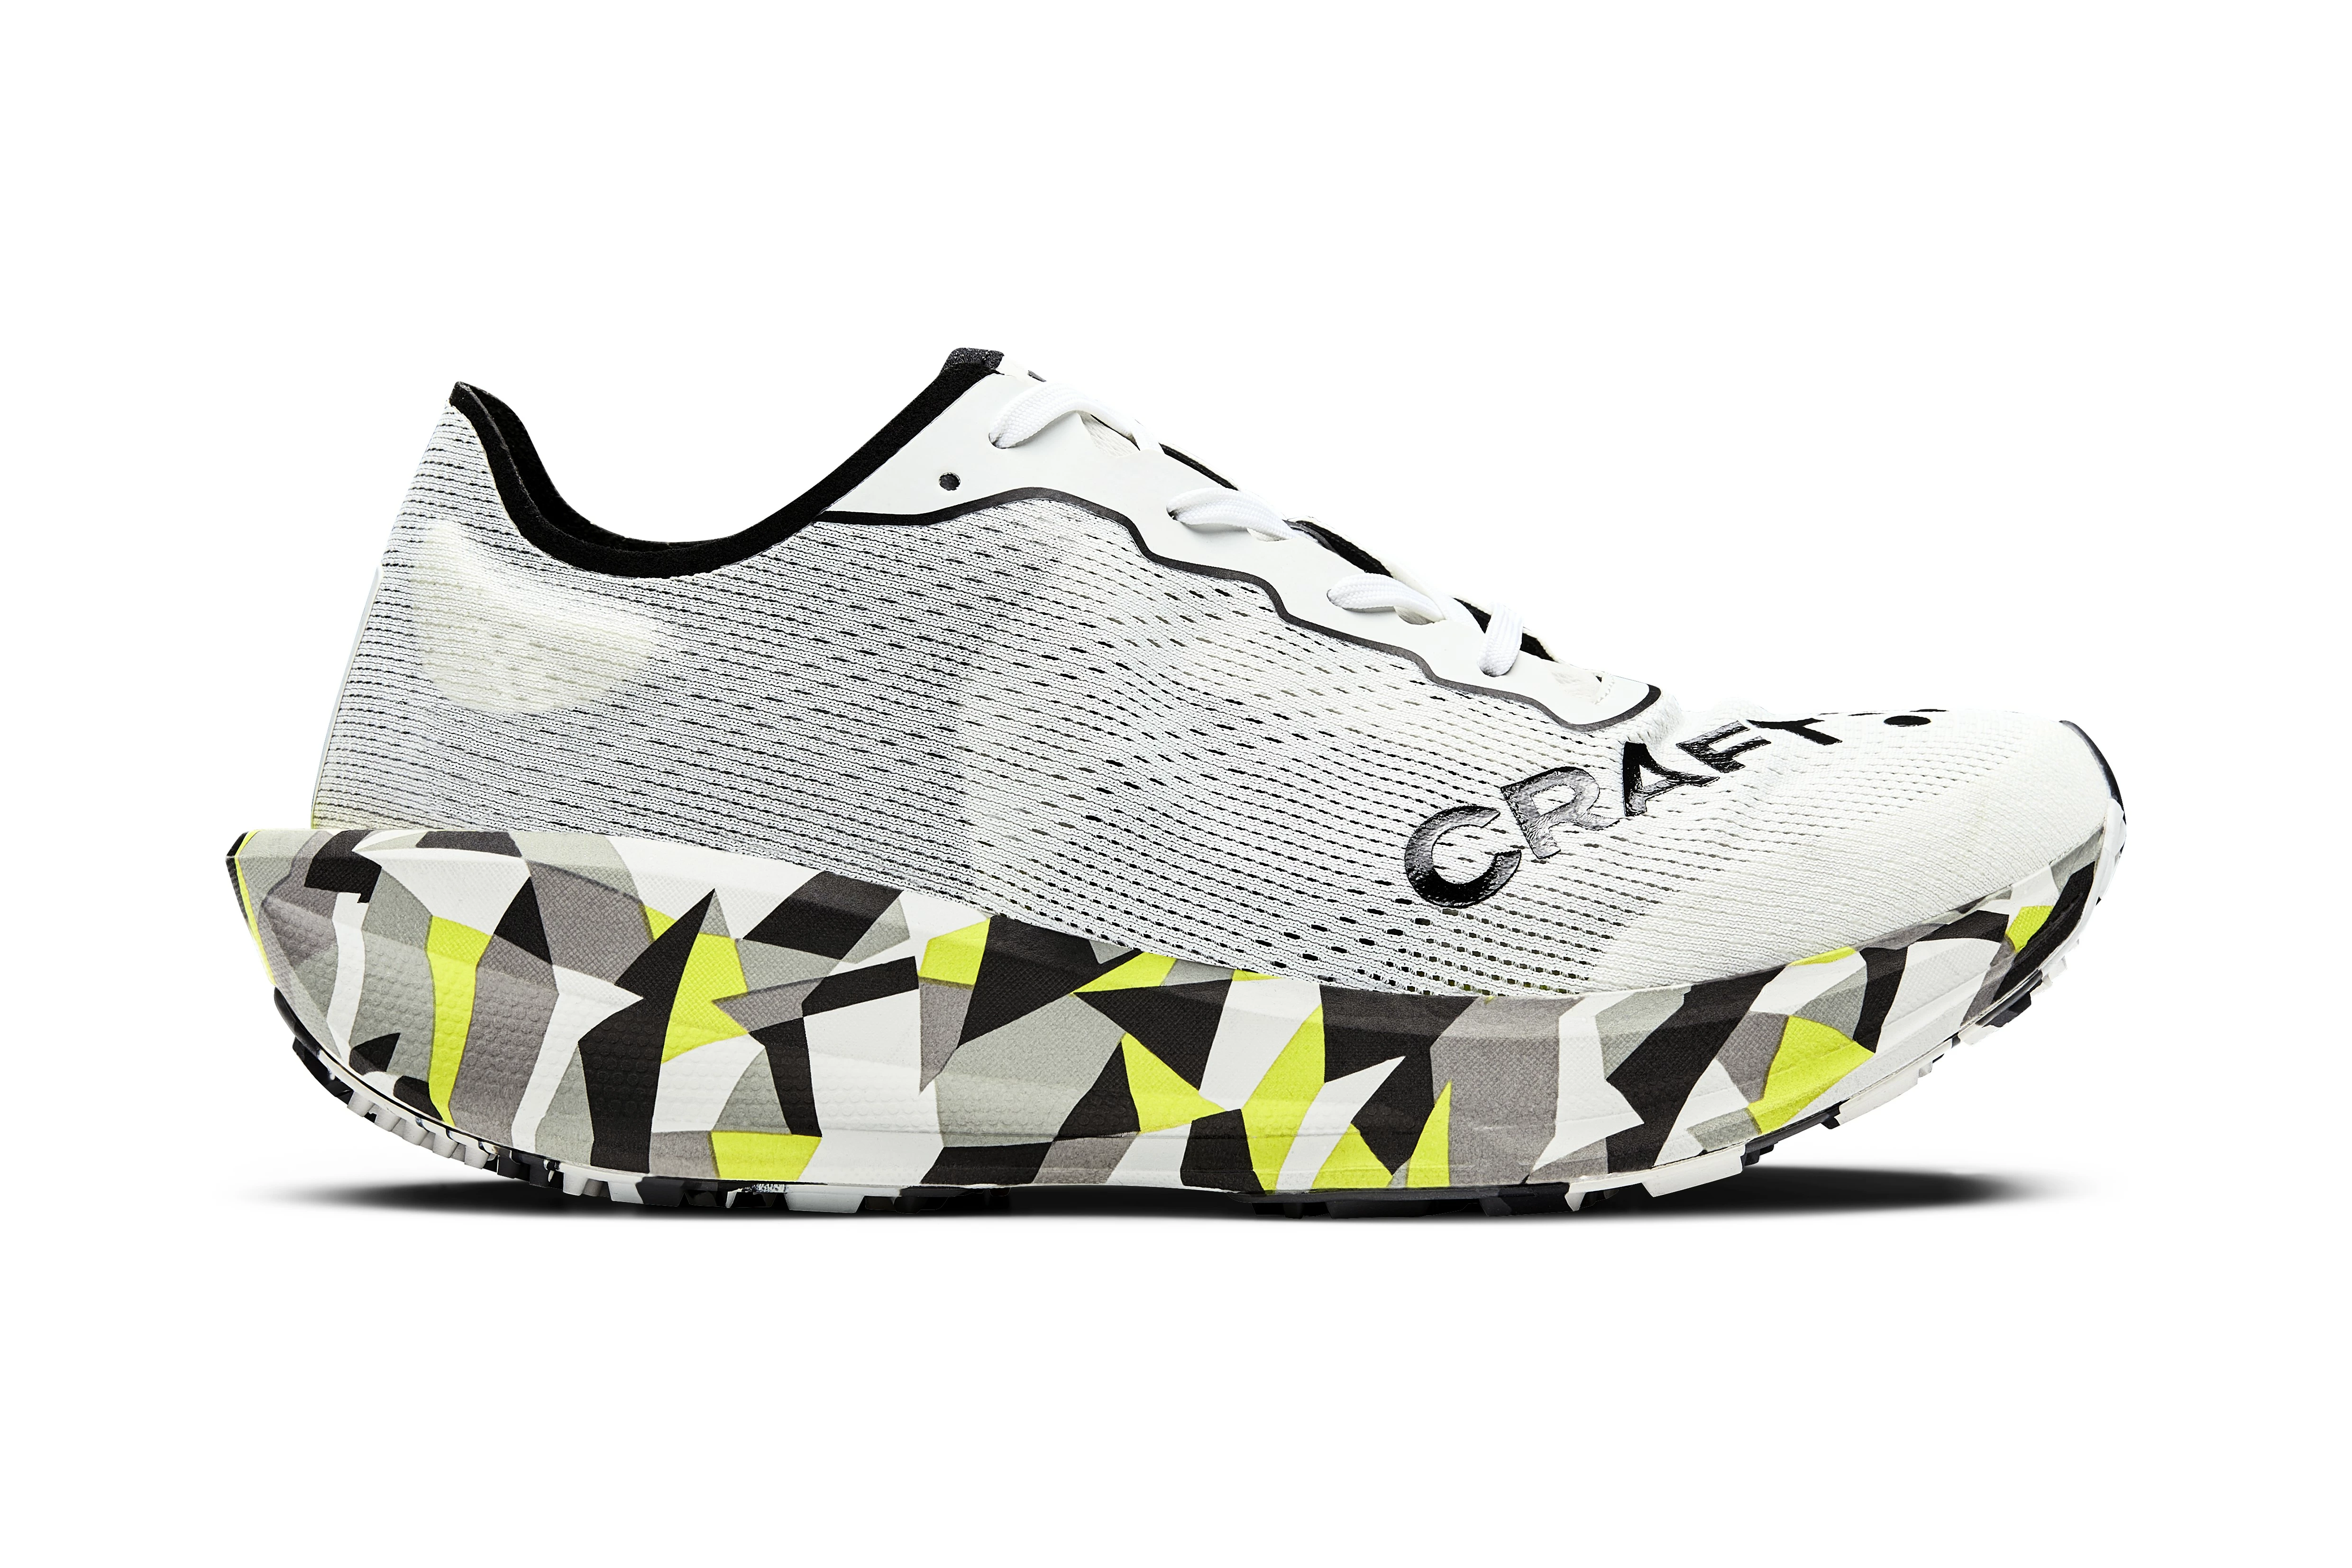 Men's Running Shoes Craft CTM Ultra Carbon 2 White